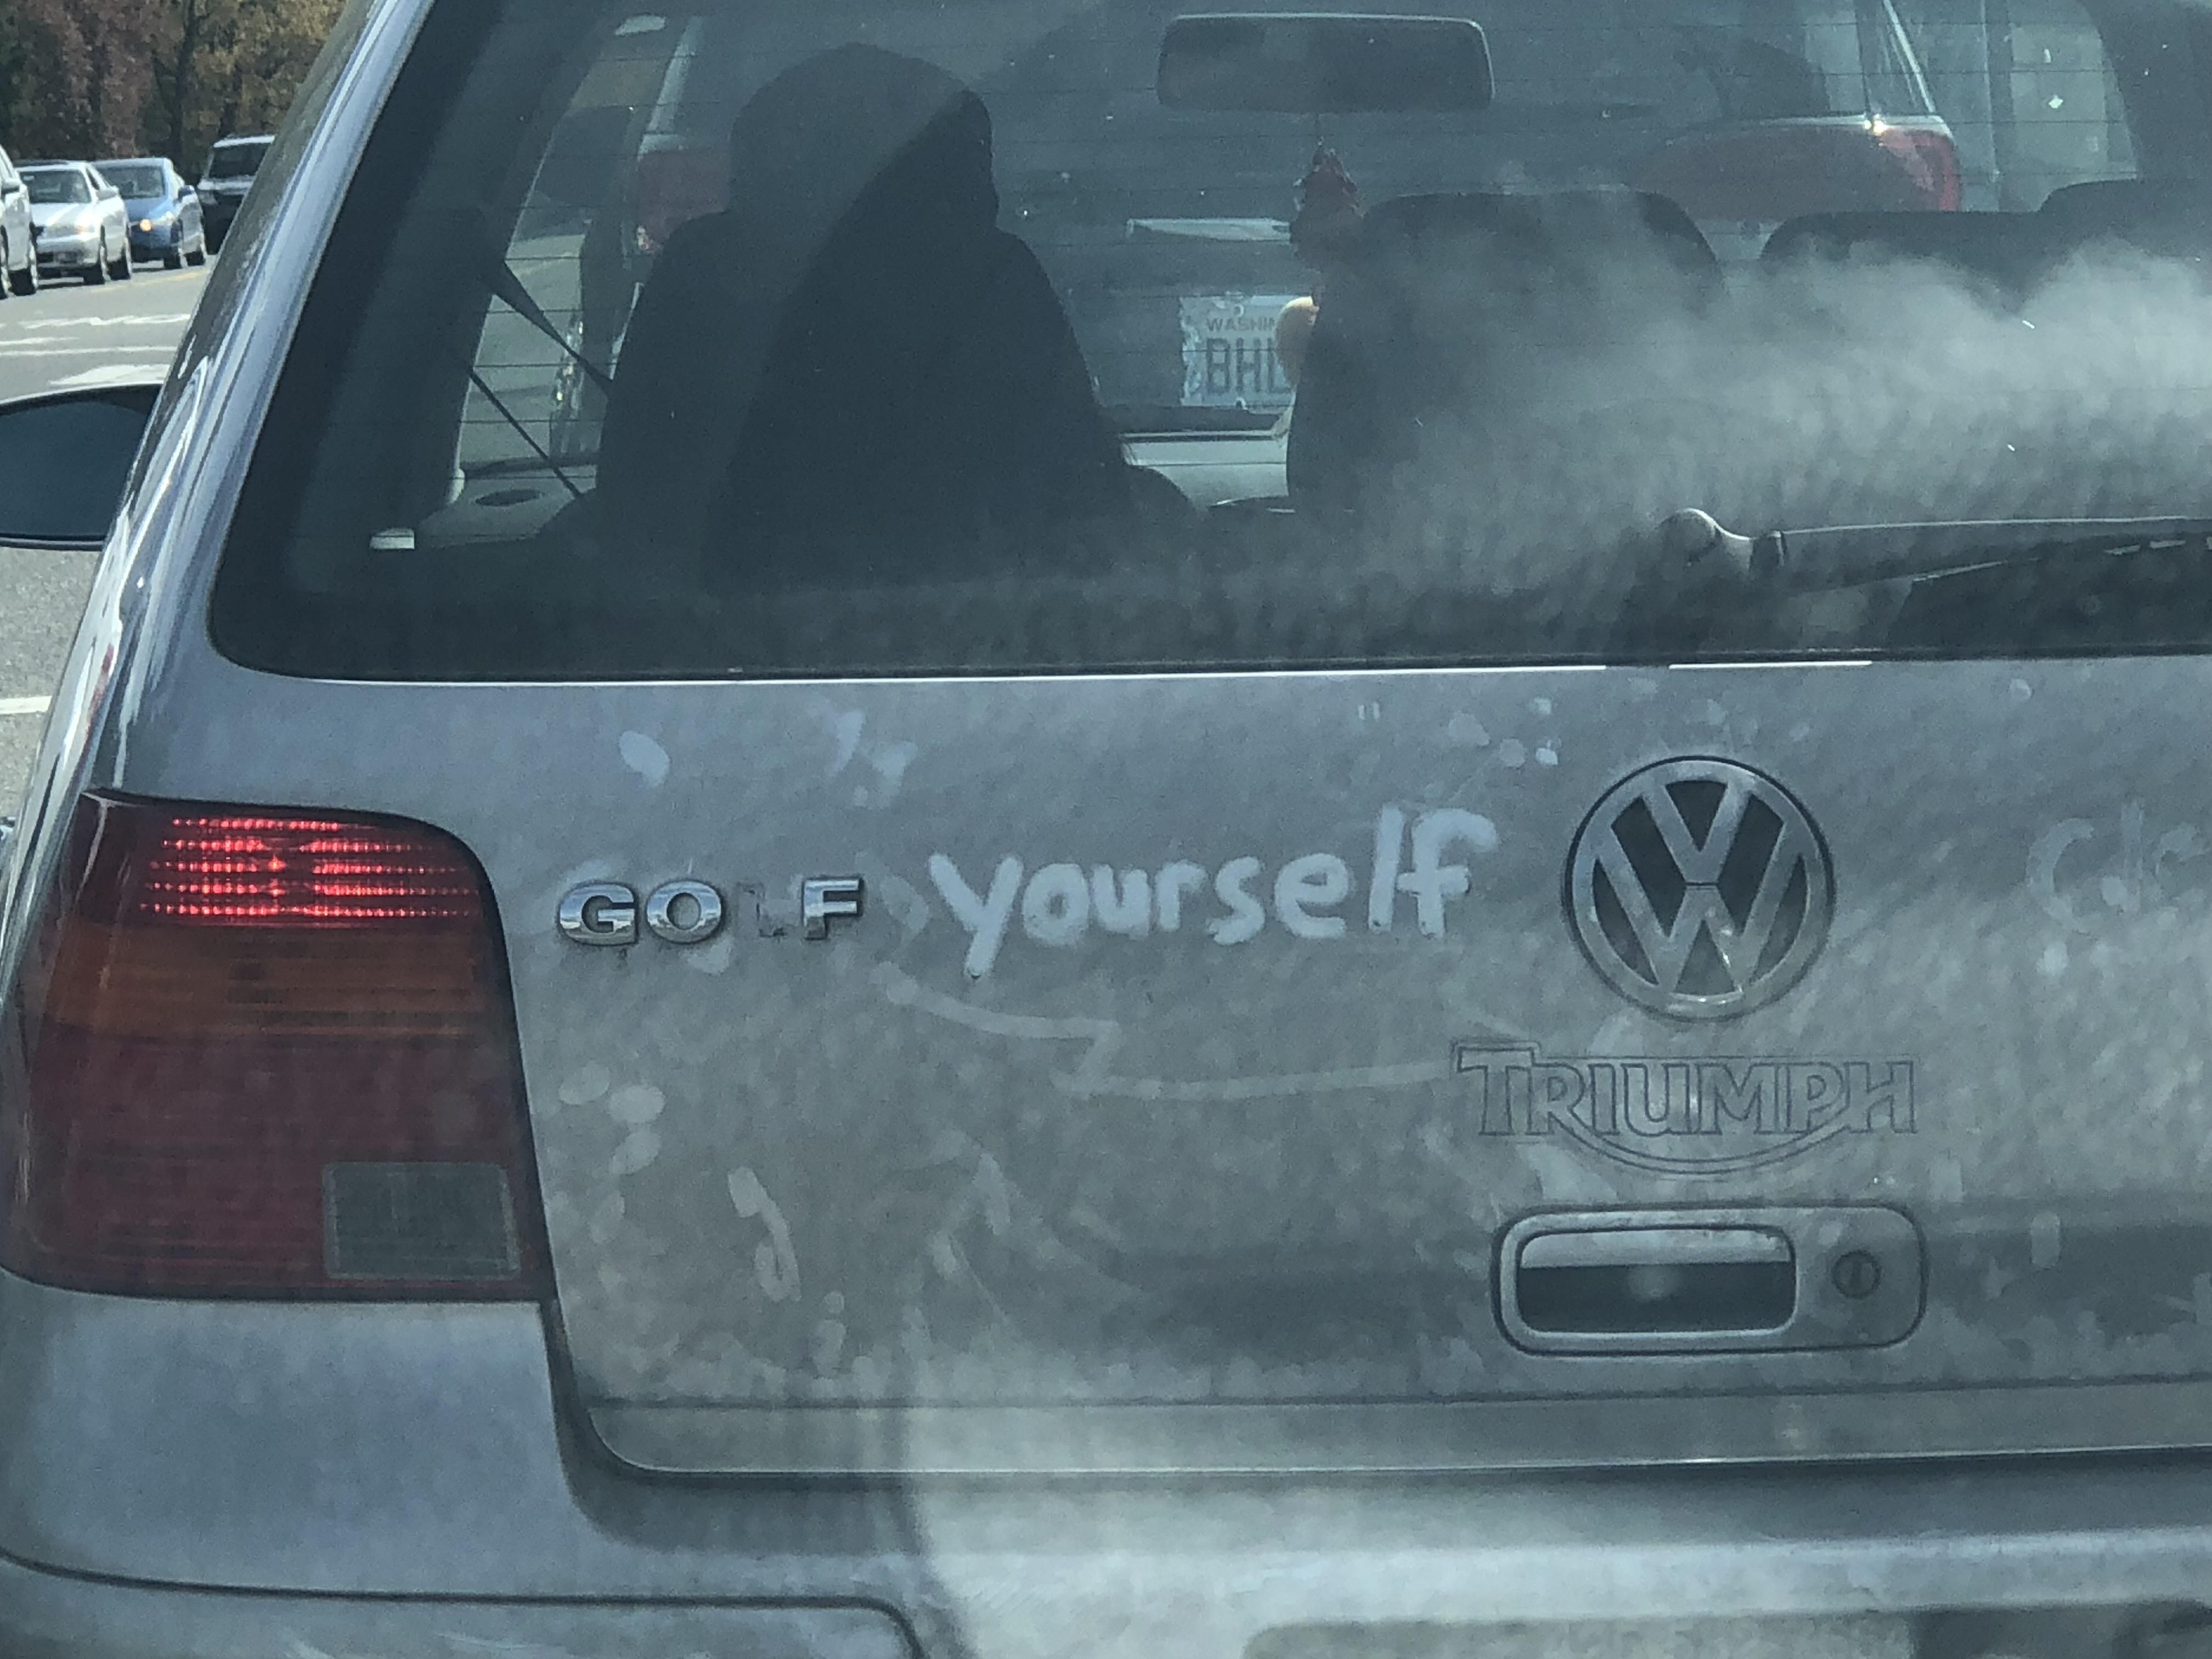 Not sure if this is directed at me or Volkswagen.